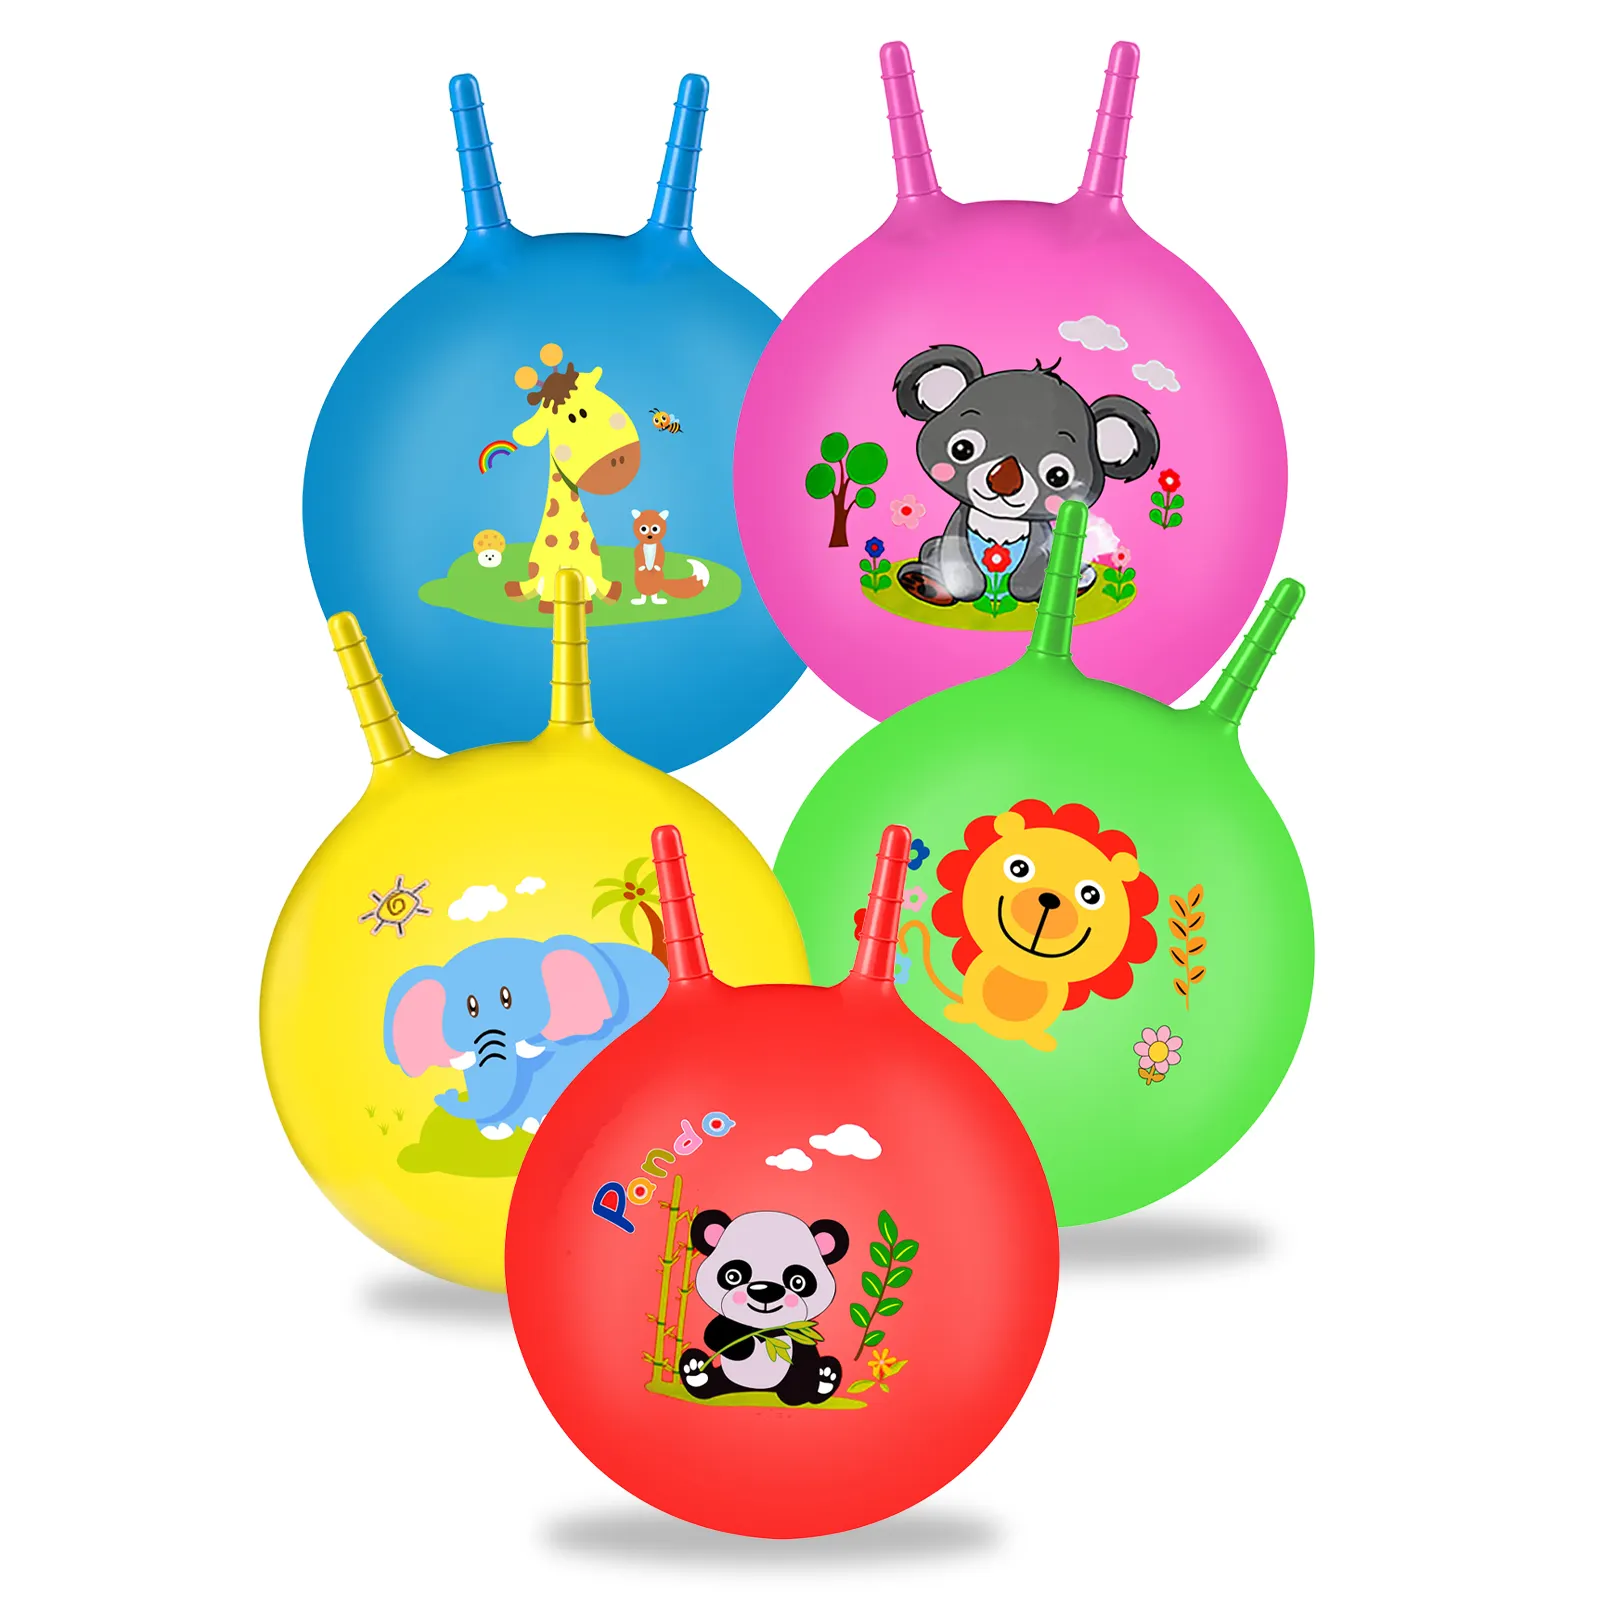 YongnKids Customizable Anti-burst Kids Toys PVC Colorful Inflatable Sheep Horn Jumping Toy Ball